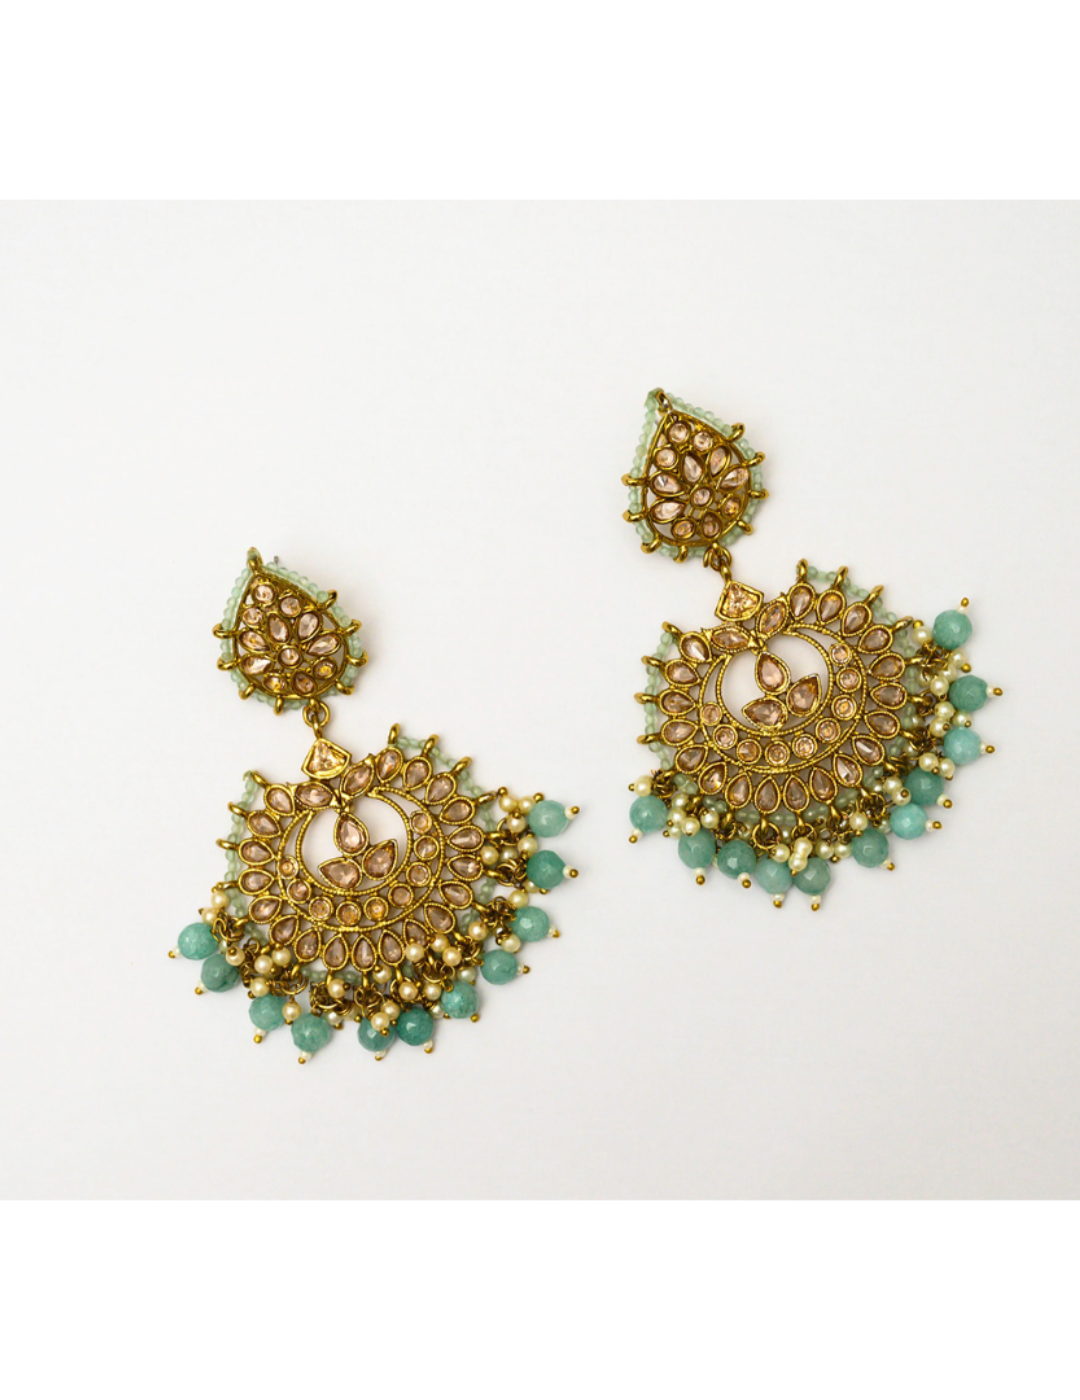 Gold Plated Kundan Studded Pastel Green Color Beads Embellished Statement Chandbali Earrings